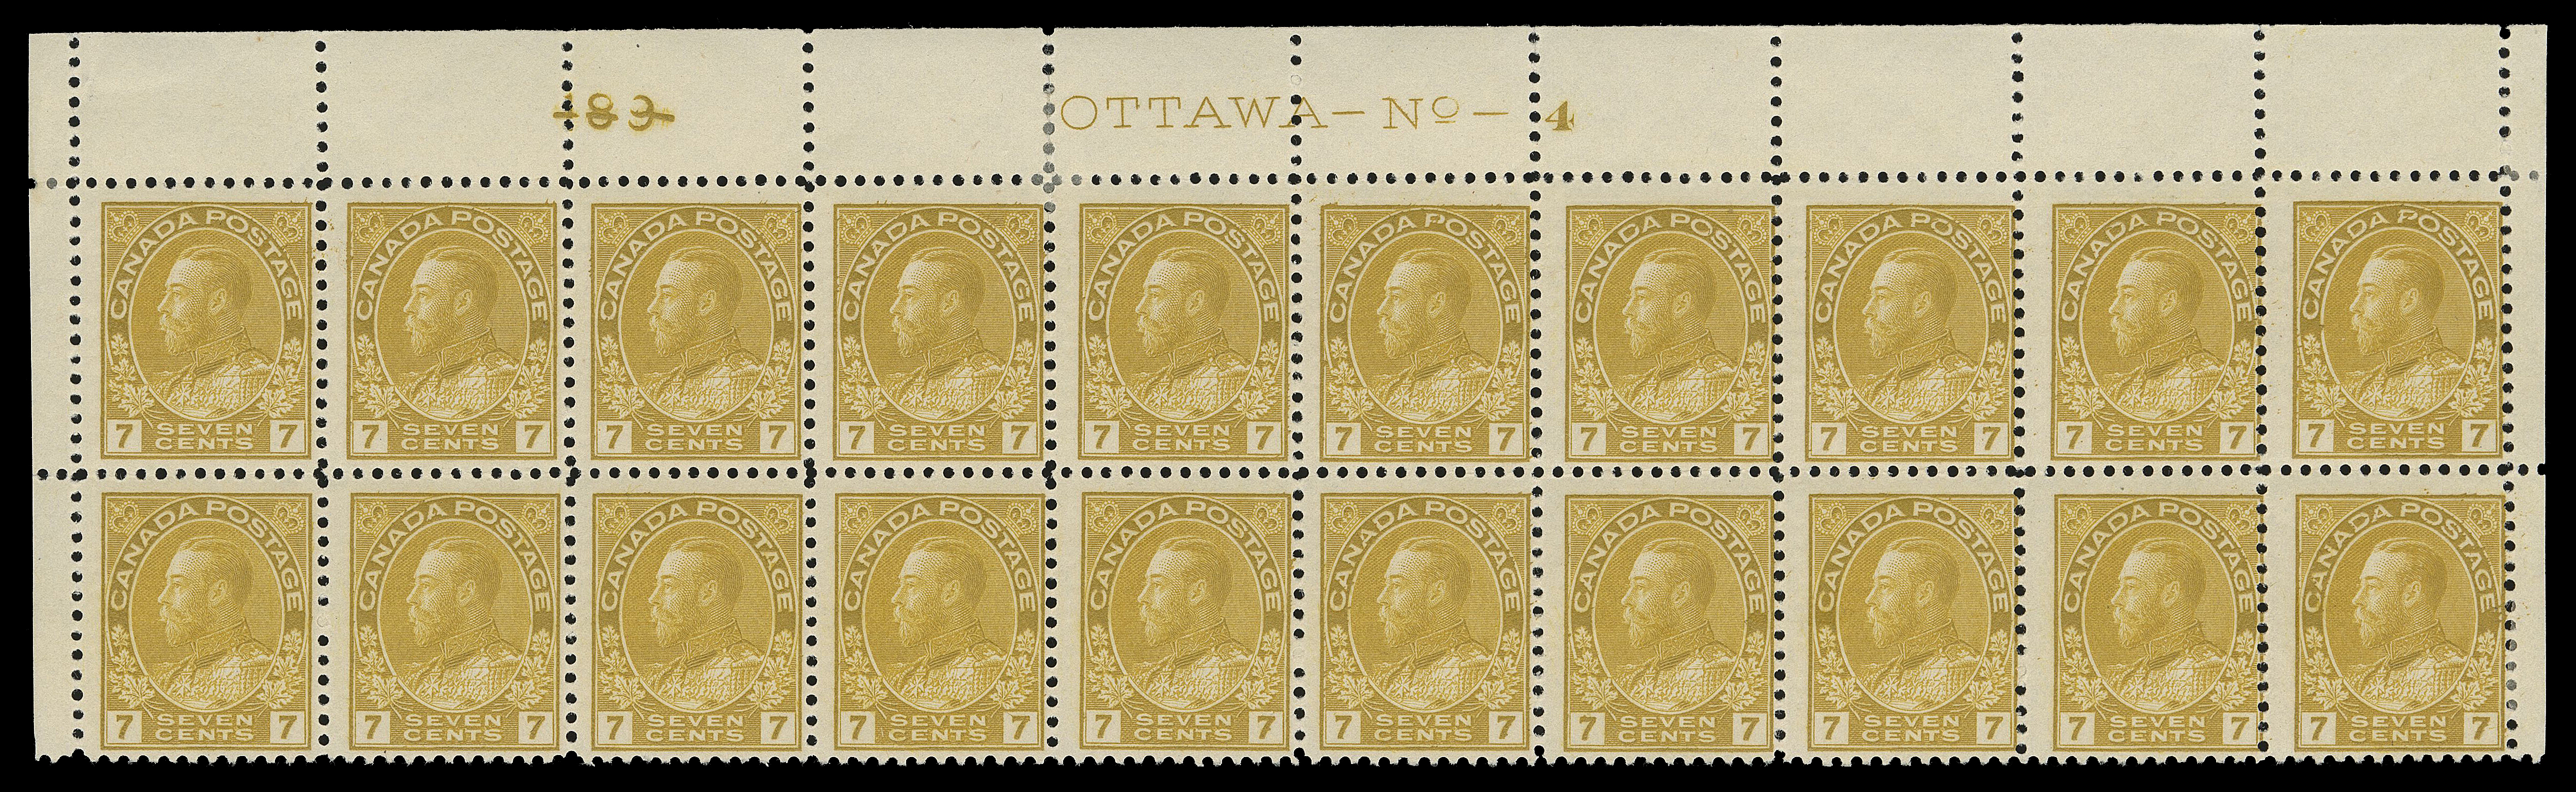 ADMIRAL STAMPS  113a shade,An upper margin Plate 4 block of twenty, remarkably rich colour, a few split perfs strengthened by a hinge, initial printing order number "189" punched out at left, seventeen stamps are NH, Fine+ (Unitrade cat. $1,480)

Provenance: C.M. Jephcott, Maresch Sale 241, June 1990; Lot 825